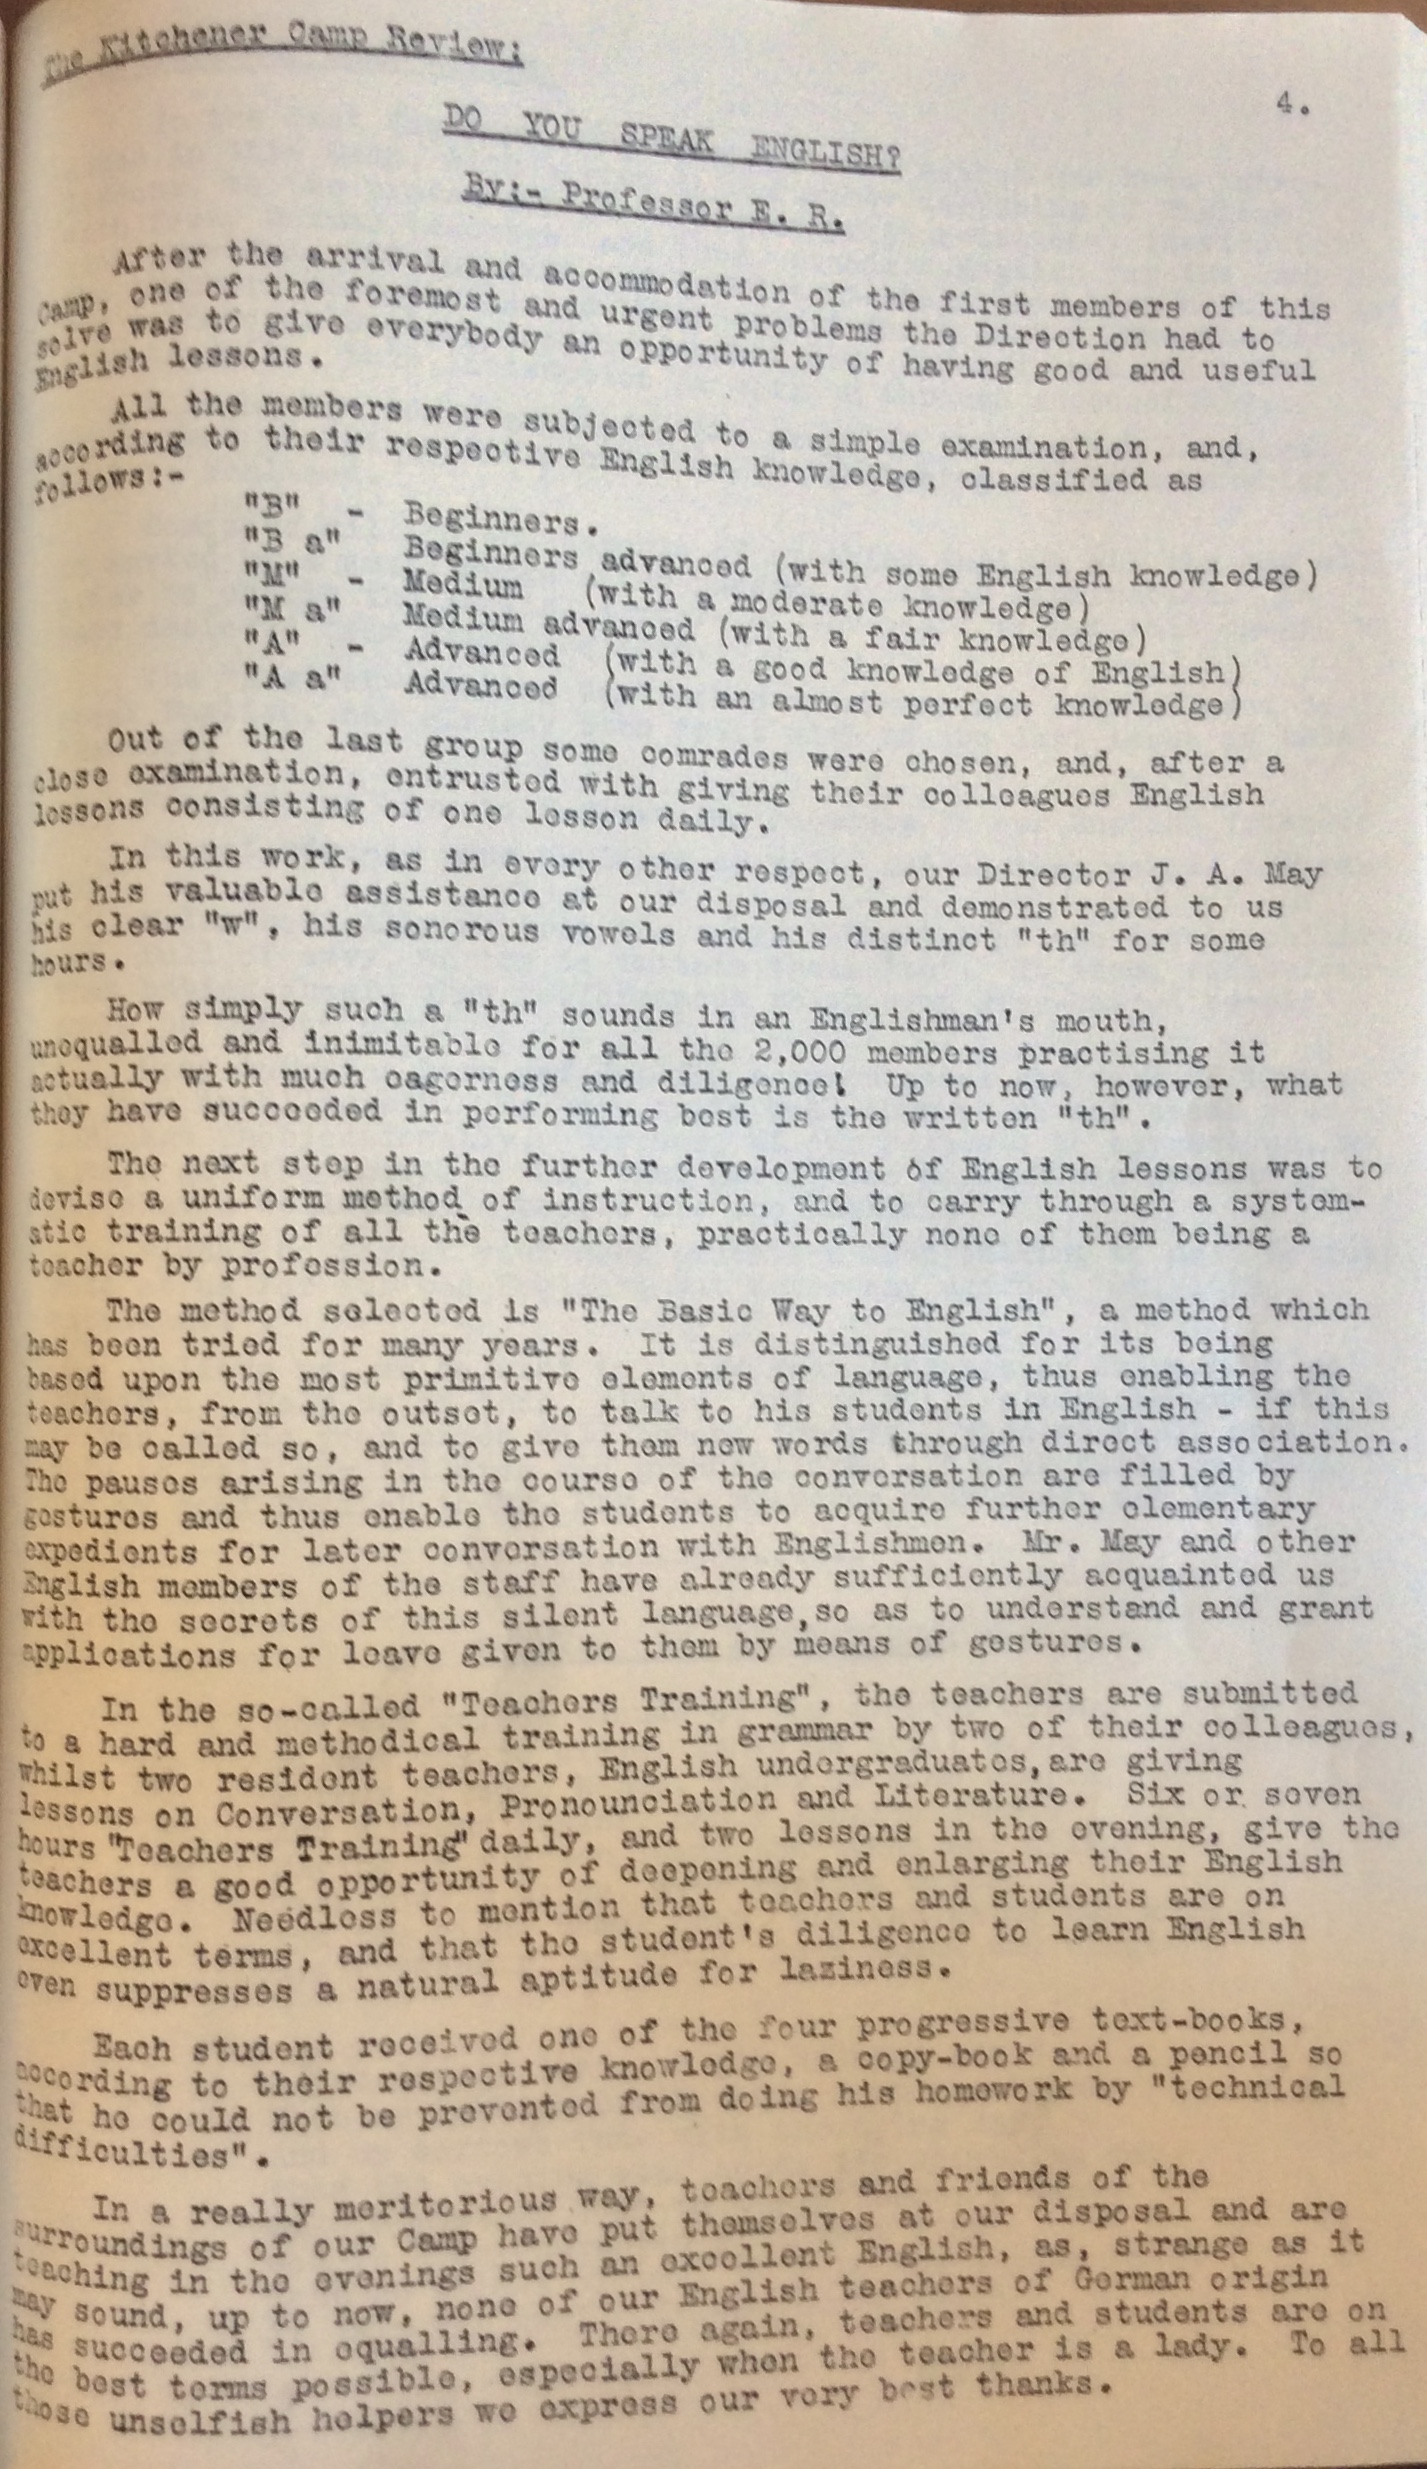 The Kitchener Camp Review, July 1939, No. 5, page 4